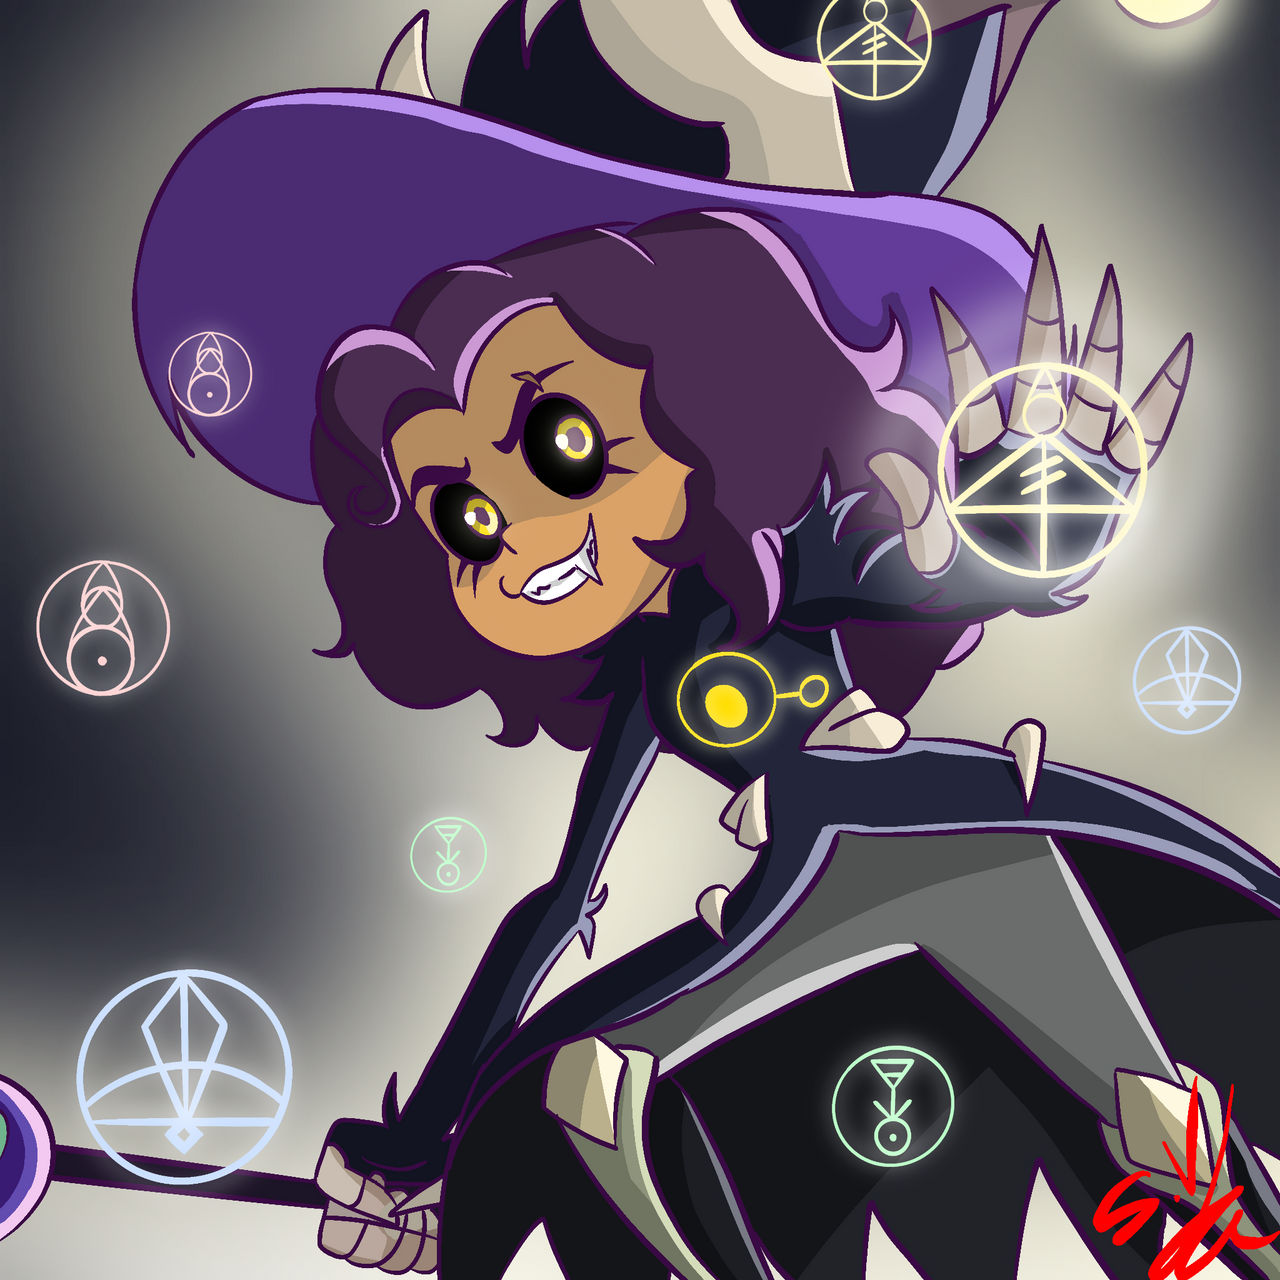 TOH - Good Witch by Starfire-vega1 on DeviantArt